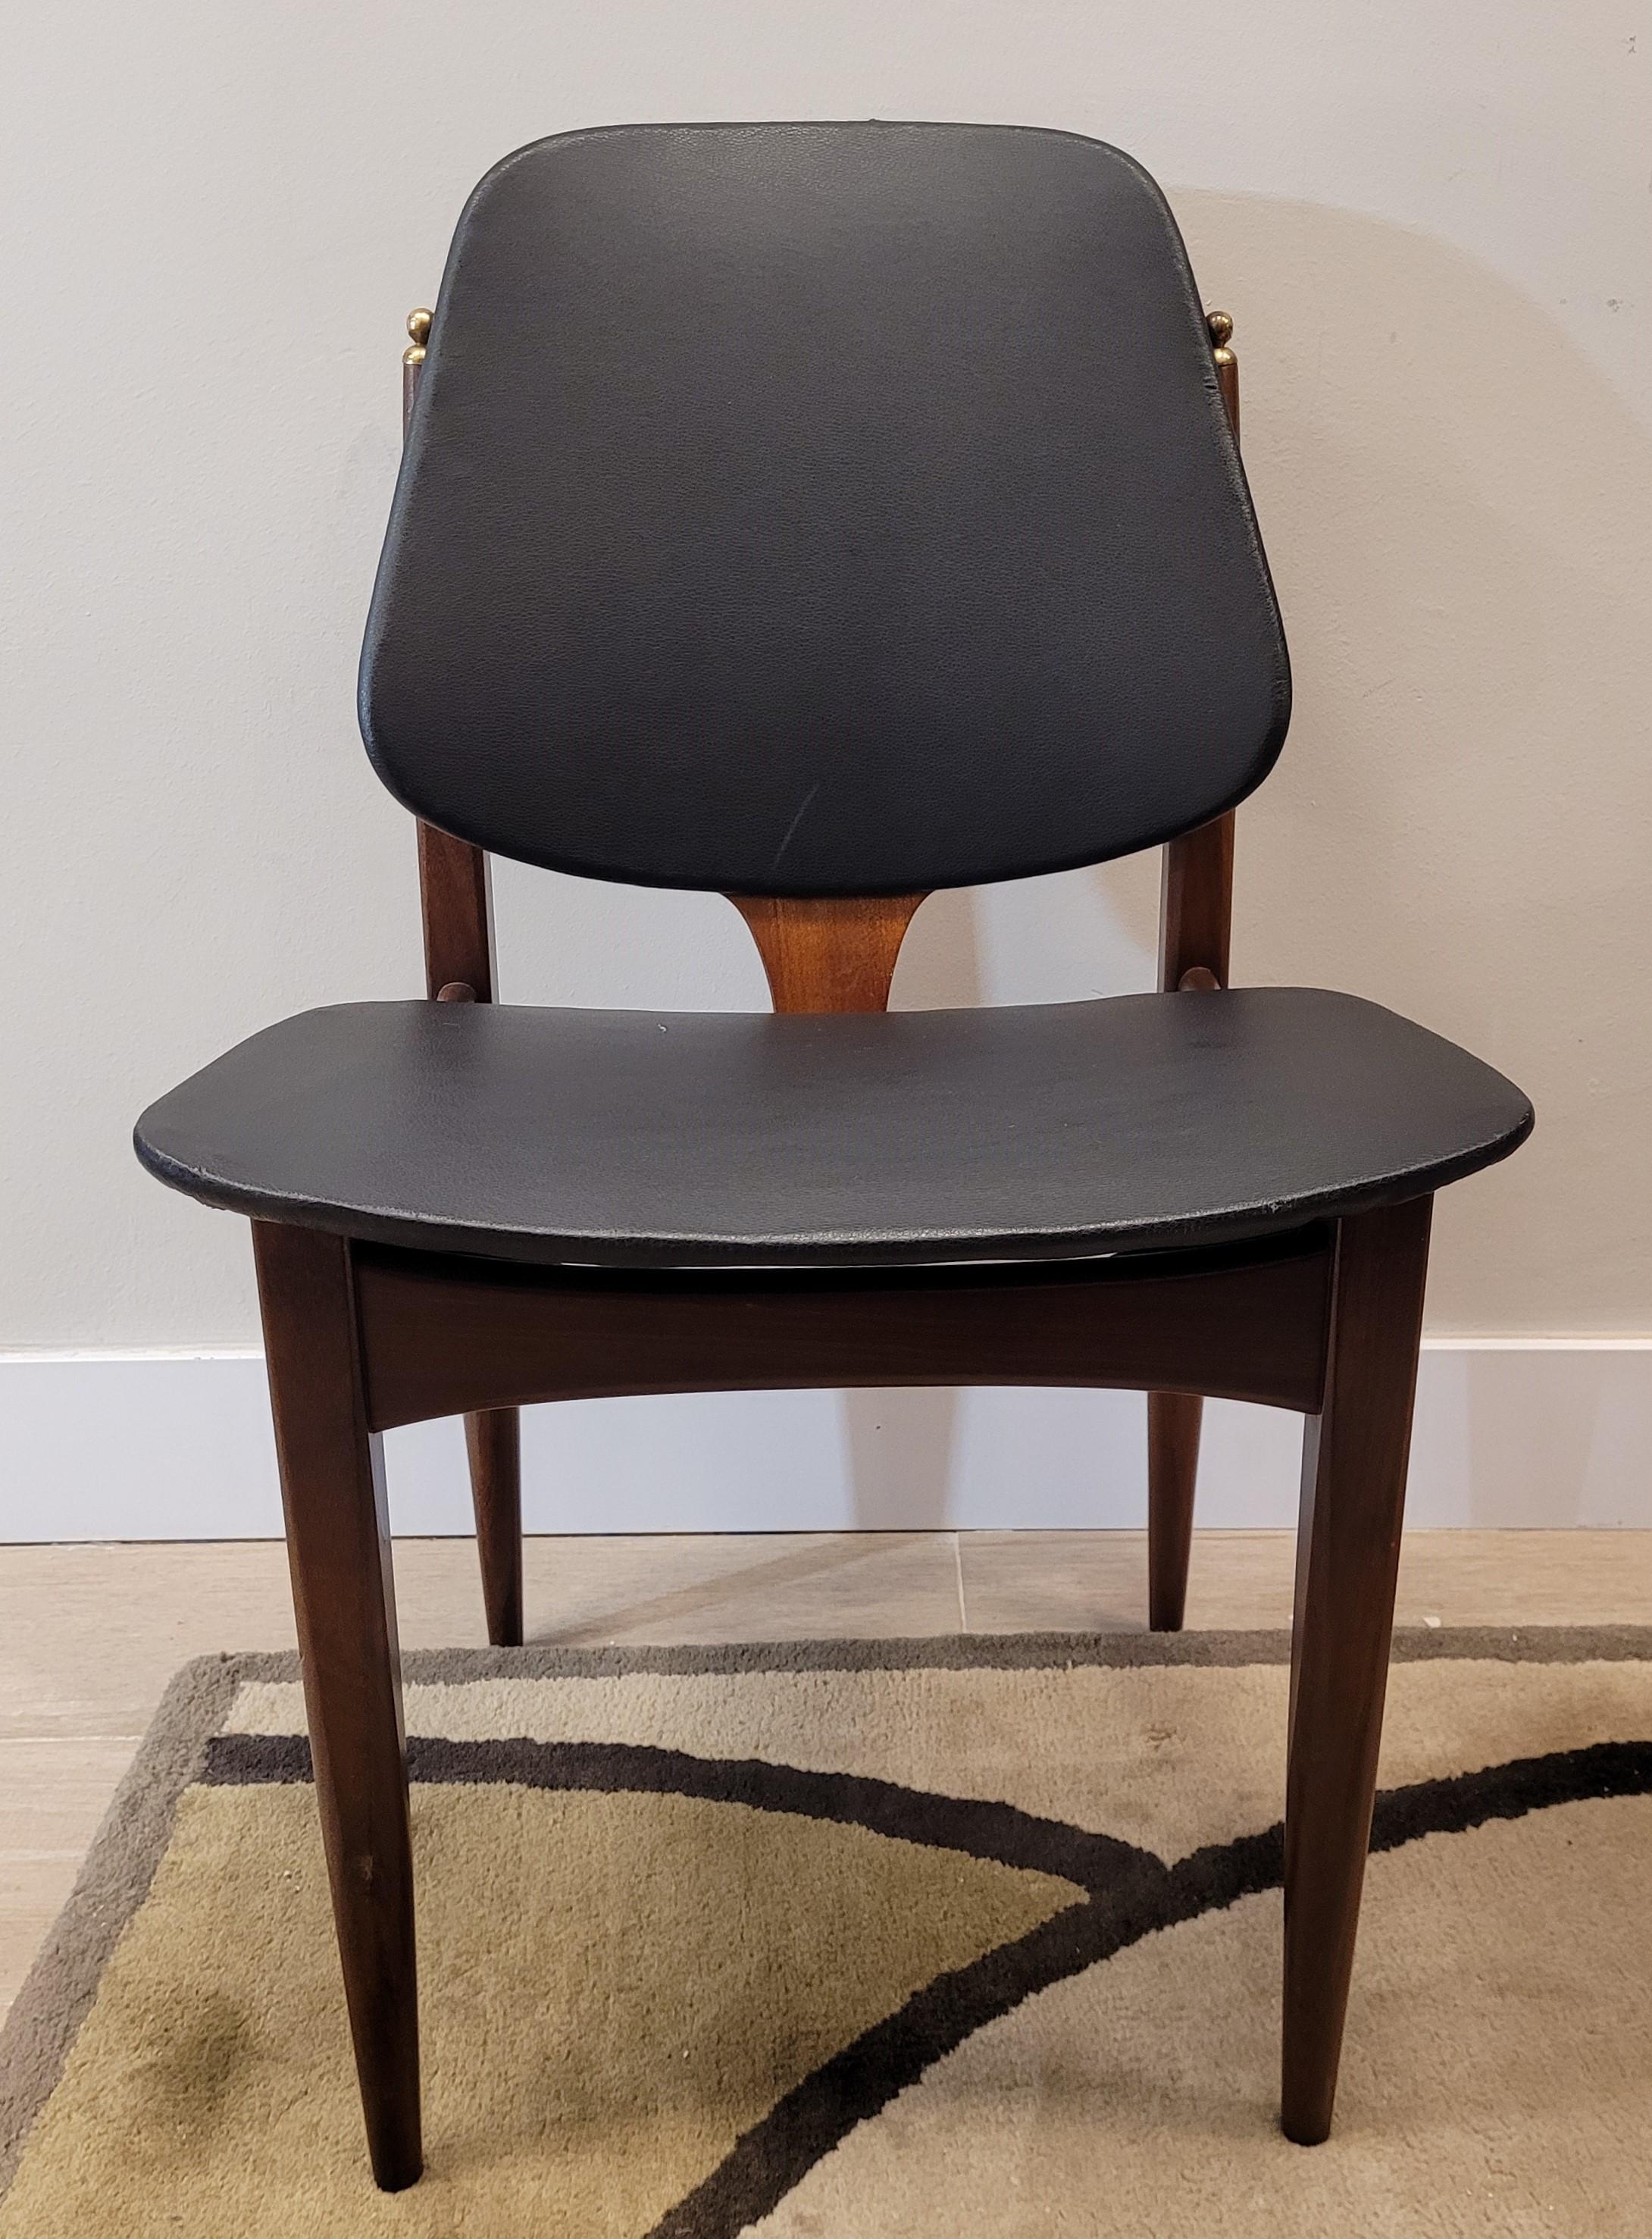 Exquisite and beautiful  pair of Midcentury design chairs made by the English factory Elliots of Newbury, in Berkshire. Each chair is structured with teak wood and is upholstered in black leather with a satin finish. Characteristic elements of